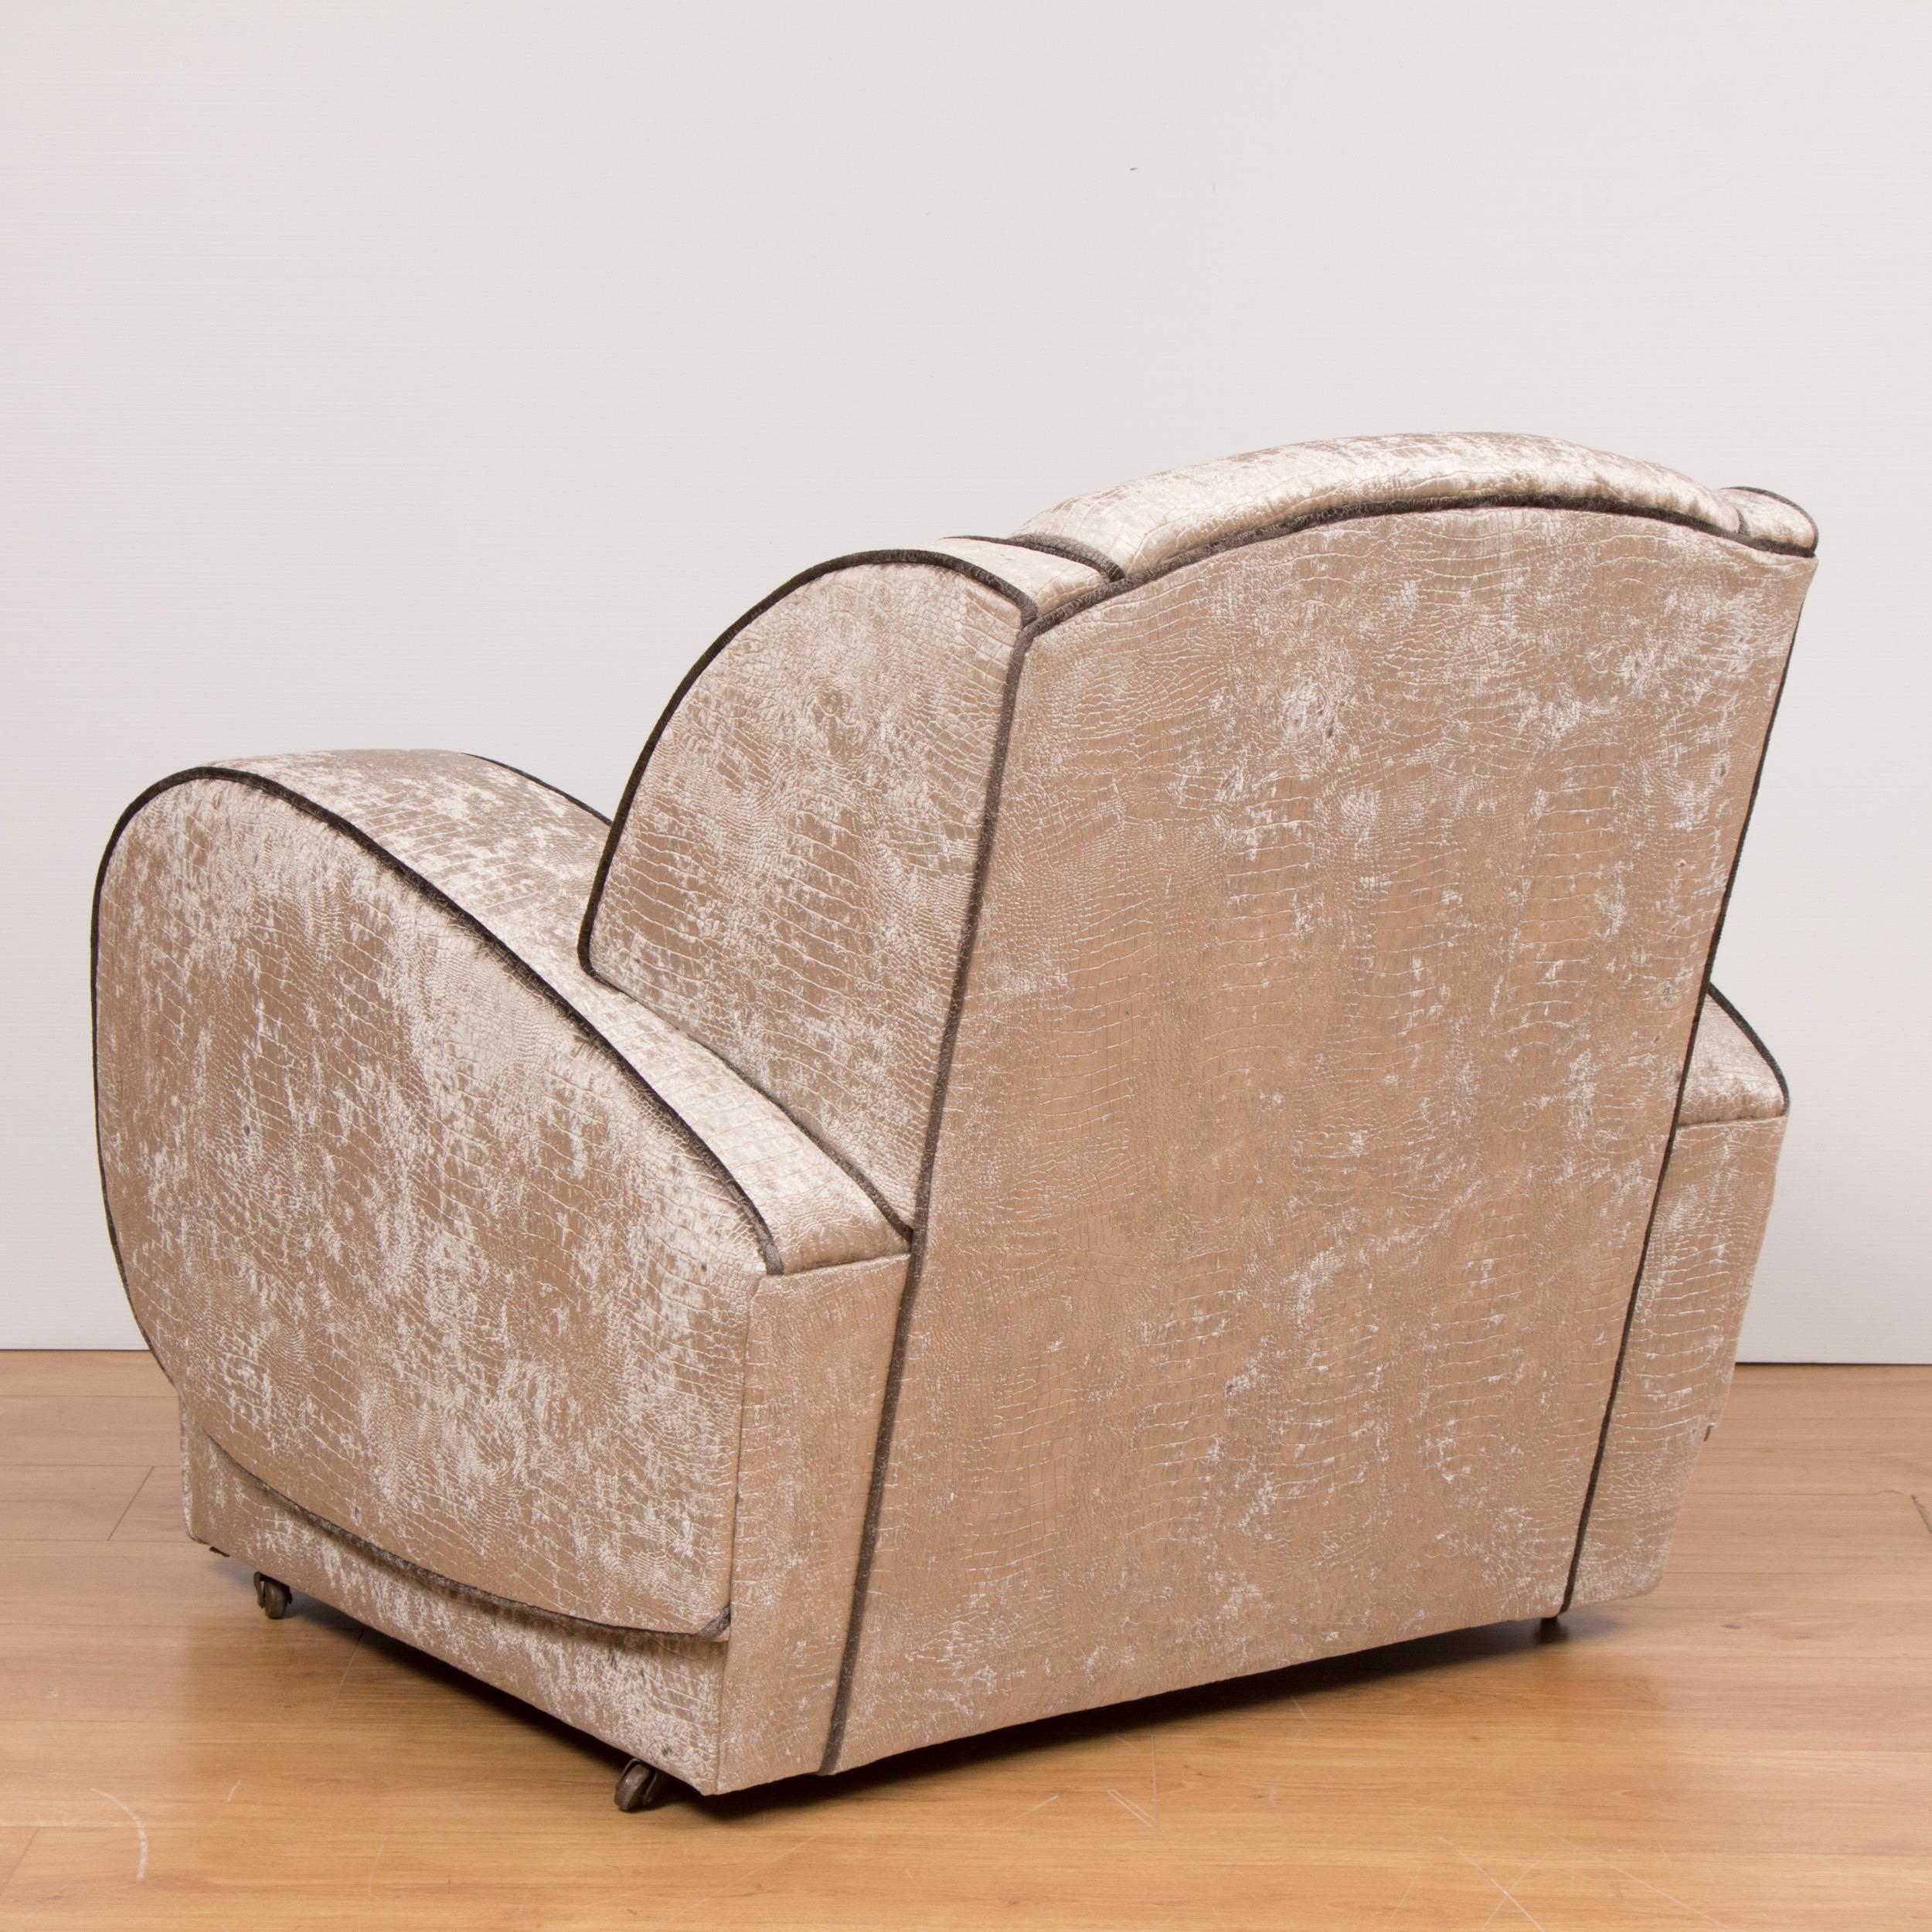 Art Deco armchairs.
A stunning pair of Art deco armchairs with lovely curved arms, newly upholstered in this amazing silver snakeskin fabric
Armchairs 84 cm H, 86 cm W, 85 cm D, seat H 43 cm, seat D 56 cm
British, circa 1930.